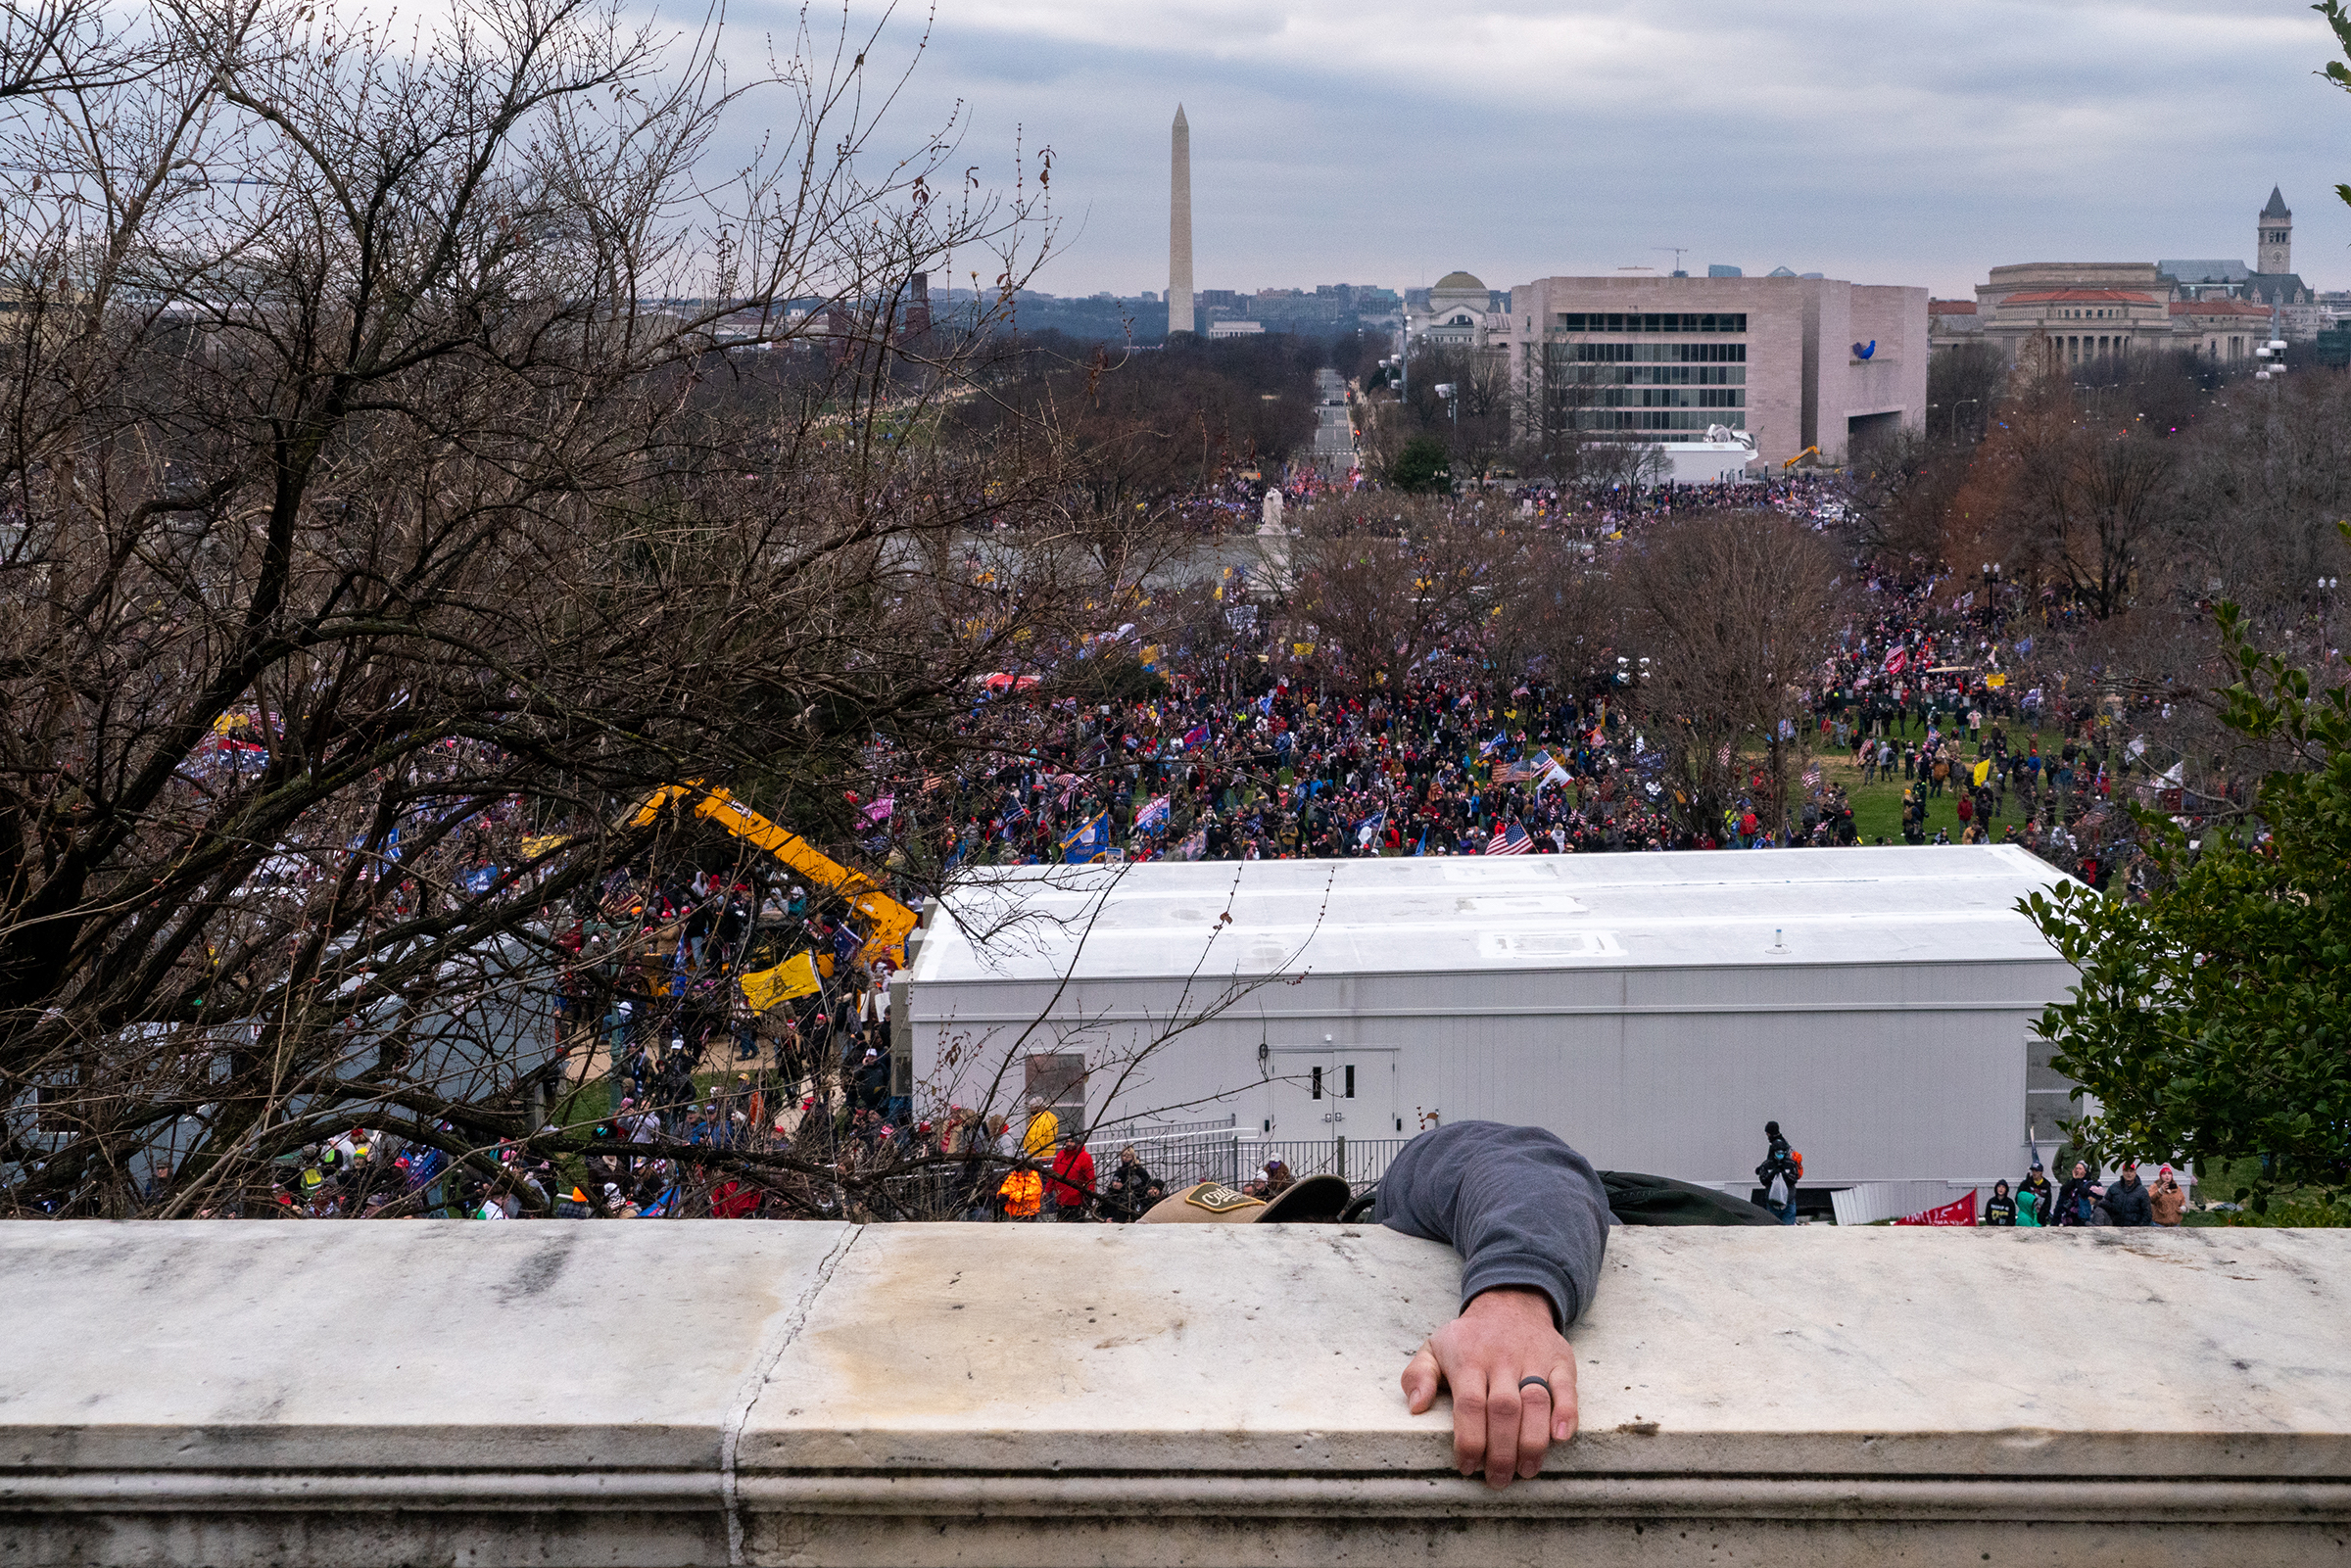 Following an inflammatory speech by President Trump on Jan. 6, protesters objecting to the certification of Joe Biden's election win by Congress that day storm the Capitol. (Peter van Agtmael—Magnum Photos for TIME)